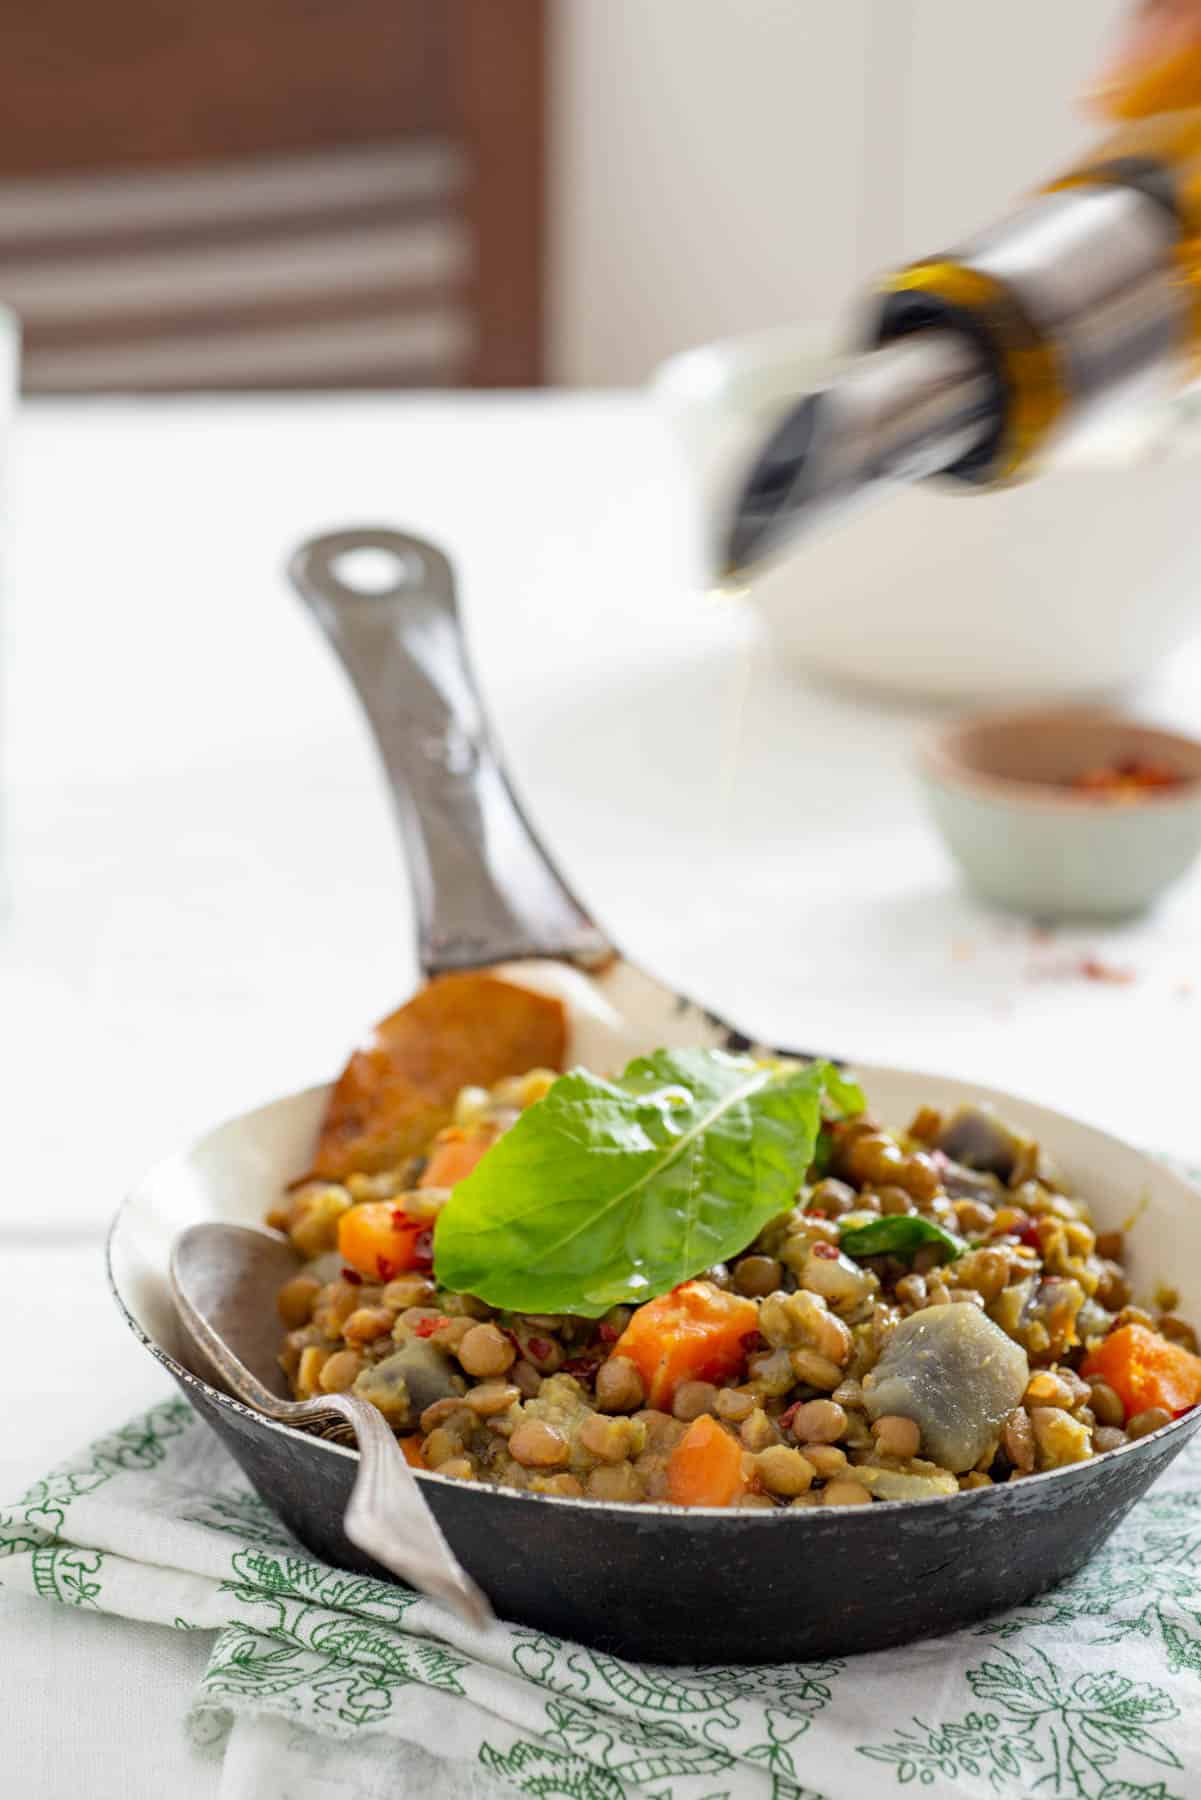 Lentils with sweet potatoes.